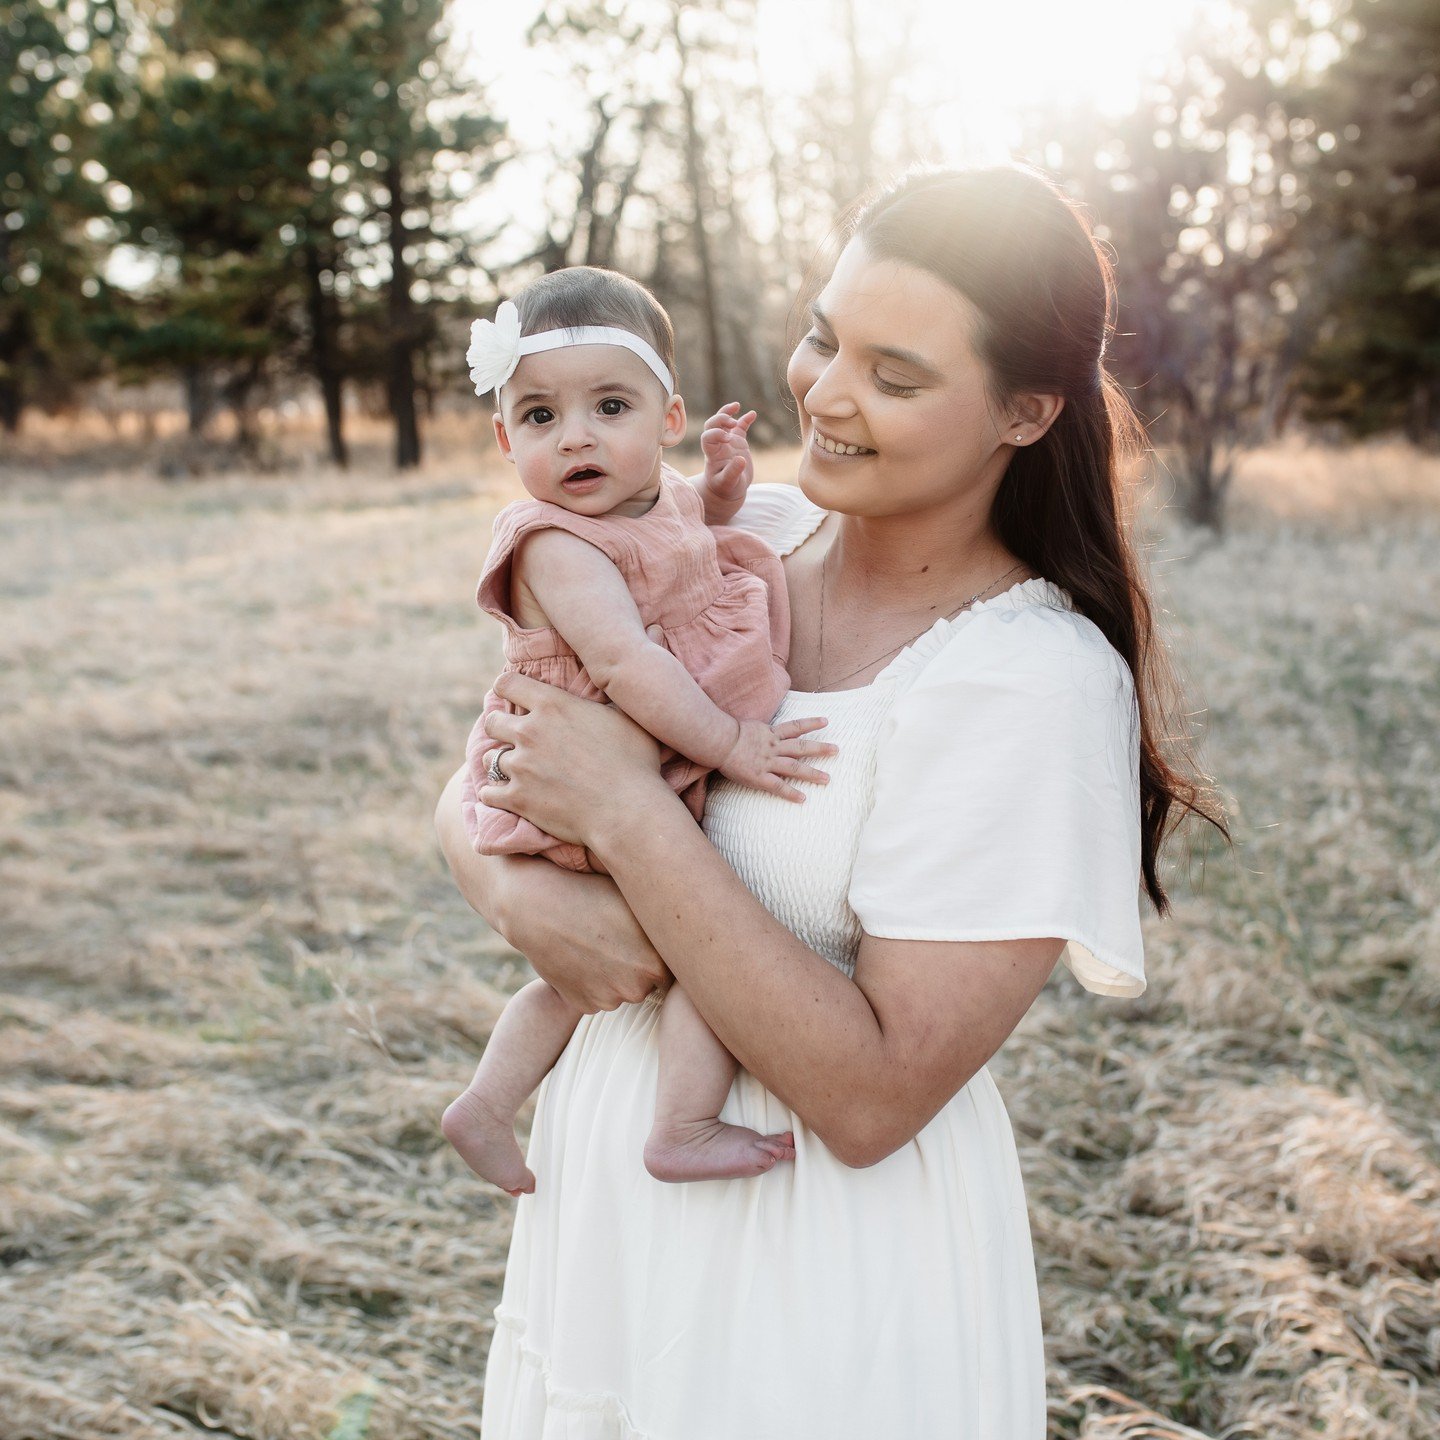 Miss Melanie and her Momma!

My favorite part about this job. From the bump pix to newborn and to motherhood . . .

#jennifernorrickphotography #motherhood #mommyandme #minisessions #mothersday #rapidcityphotographer #southdakotaphotographer #blackhi